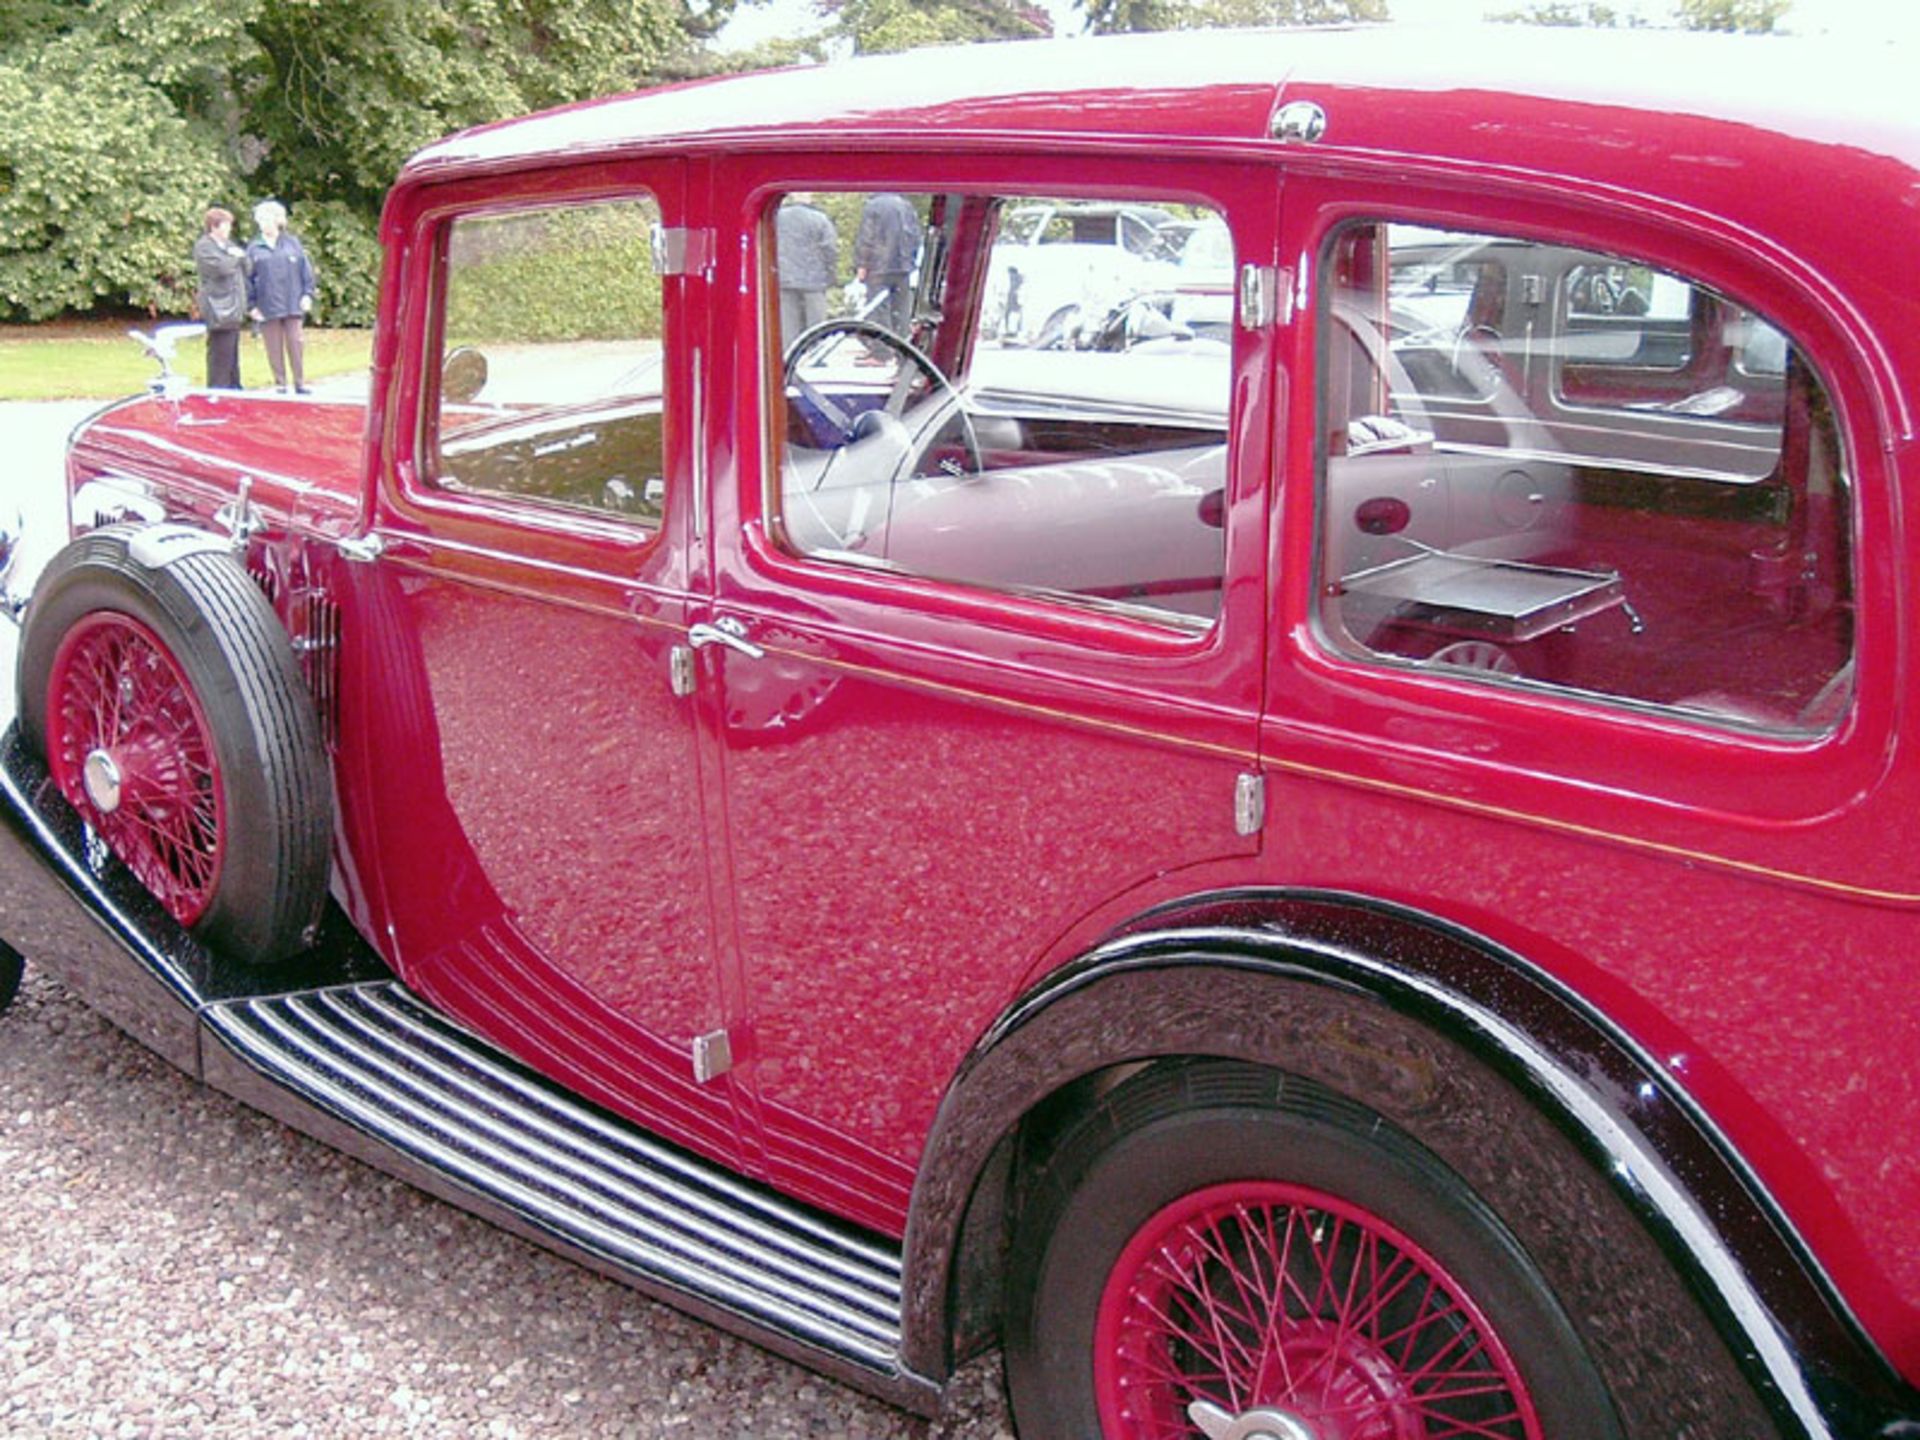 1936 Alvis Crested Eagle TF 19.82 Saloon - Image 2 of 4